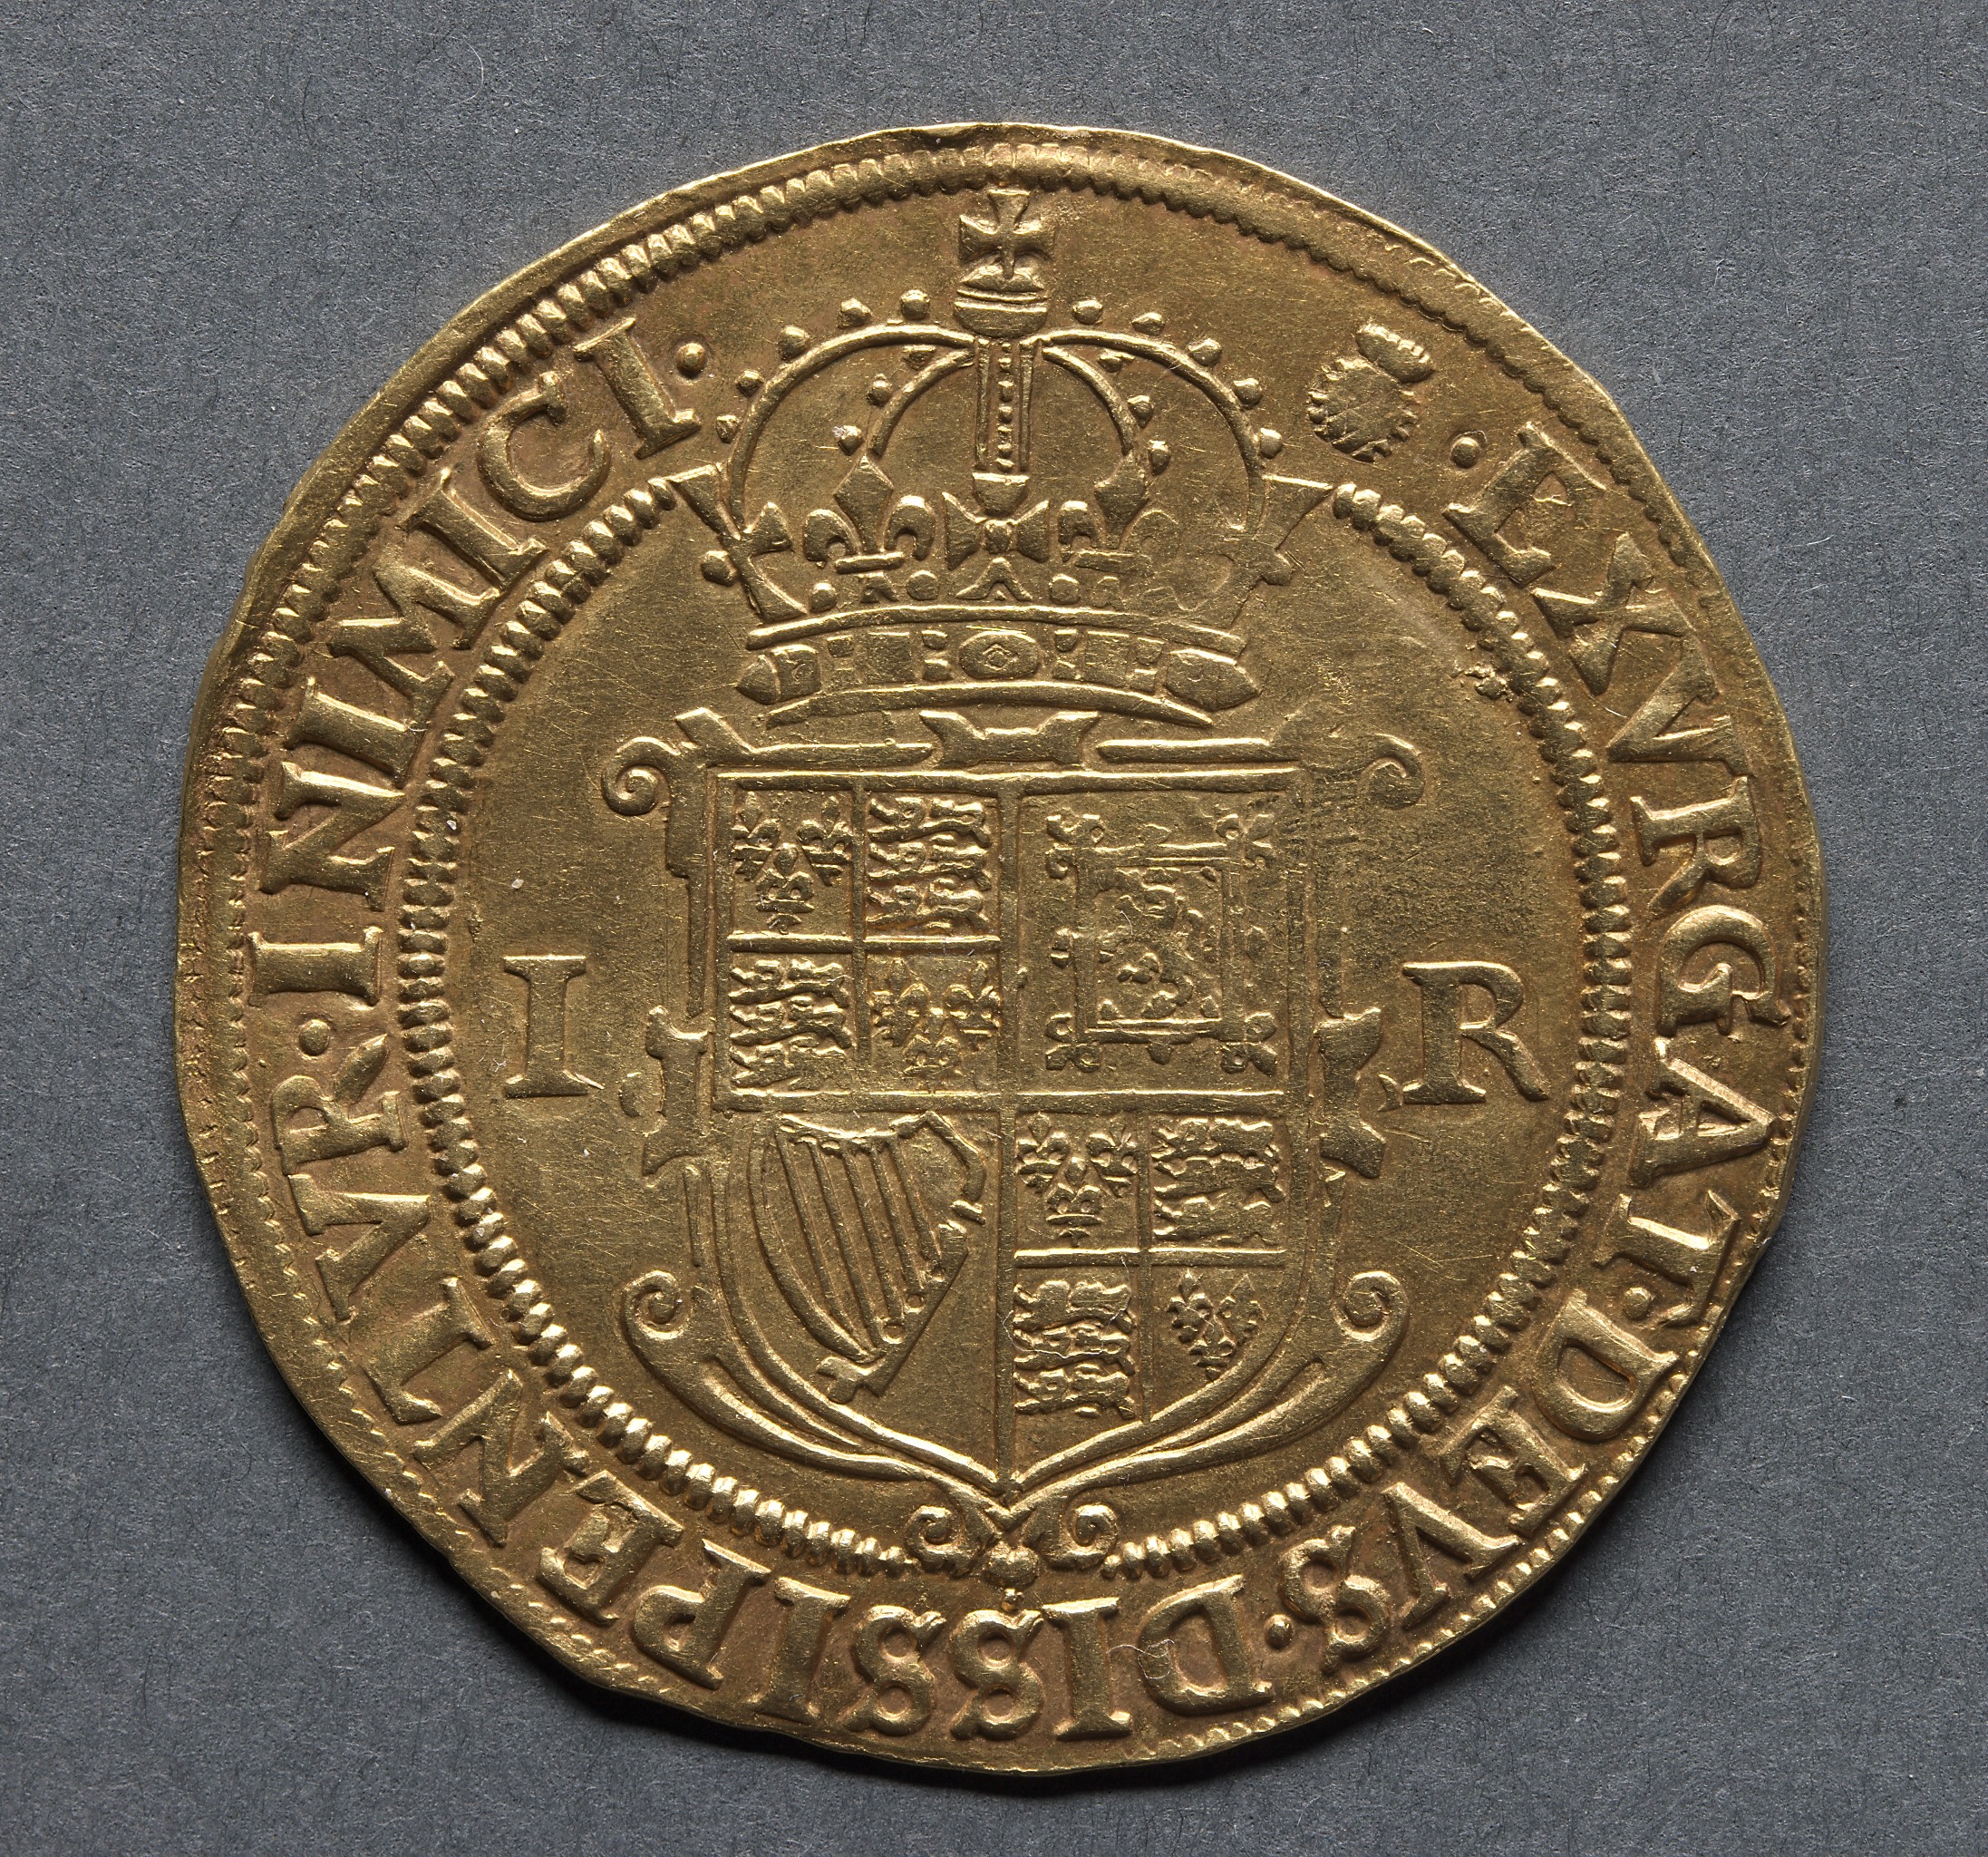 Sovereign: Crowned Shield with arms of England, Scotland, and Ireland (reverse)